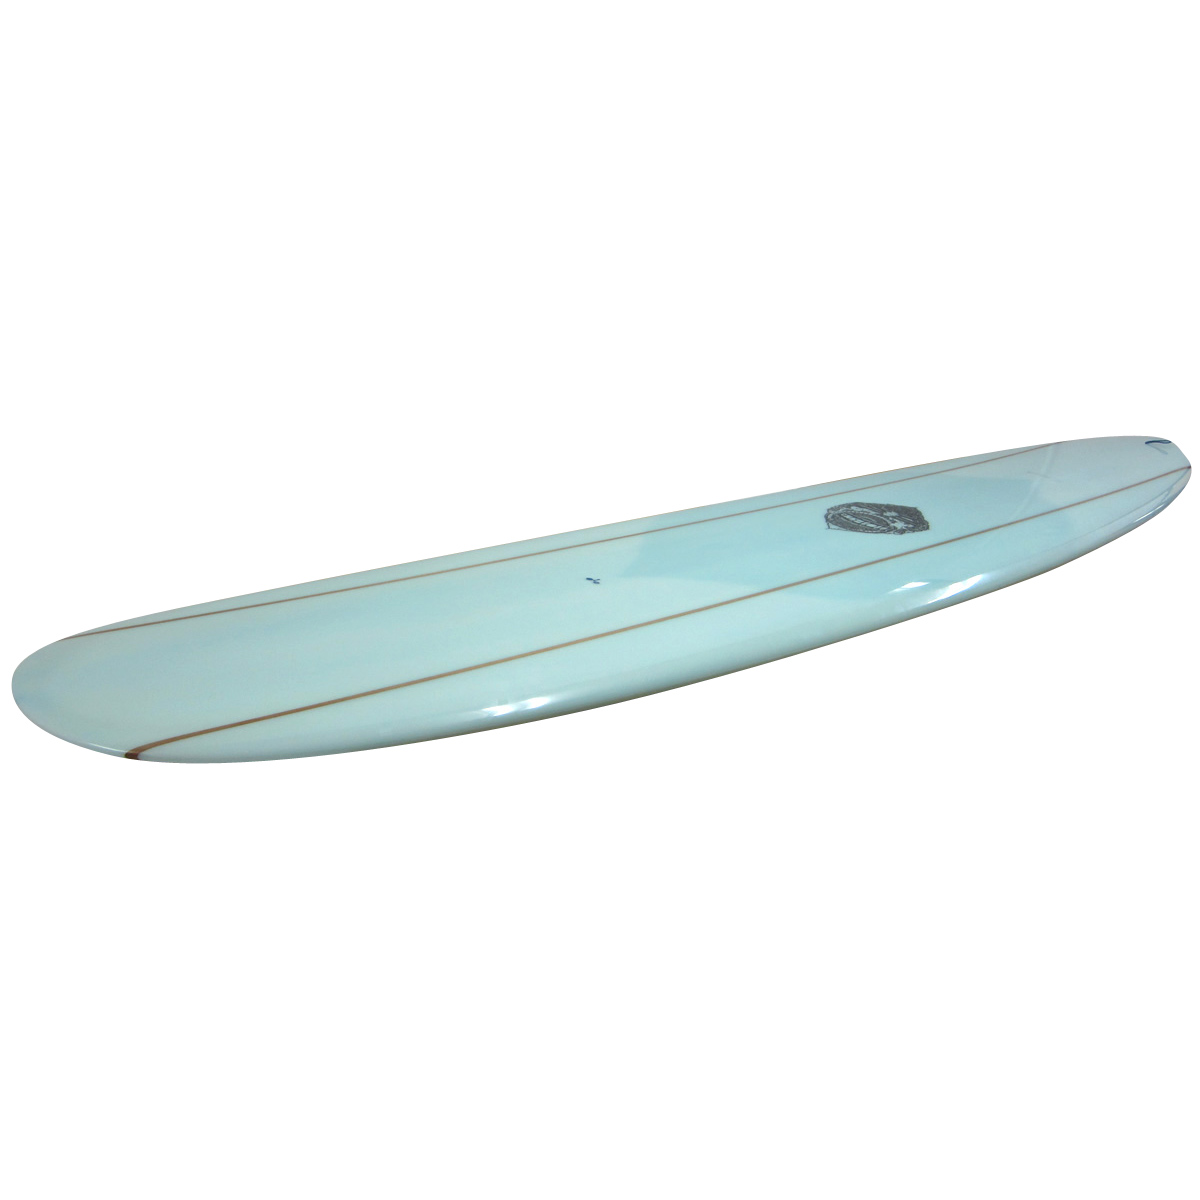 HOBIE / ONE FIN PIN 9`5 Shaped By Terry Martin 